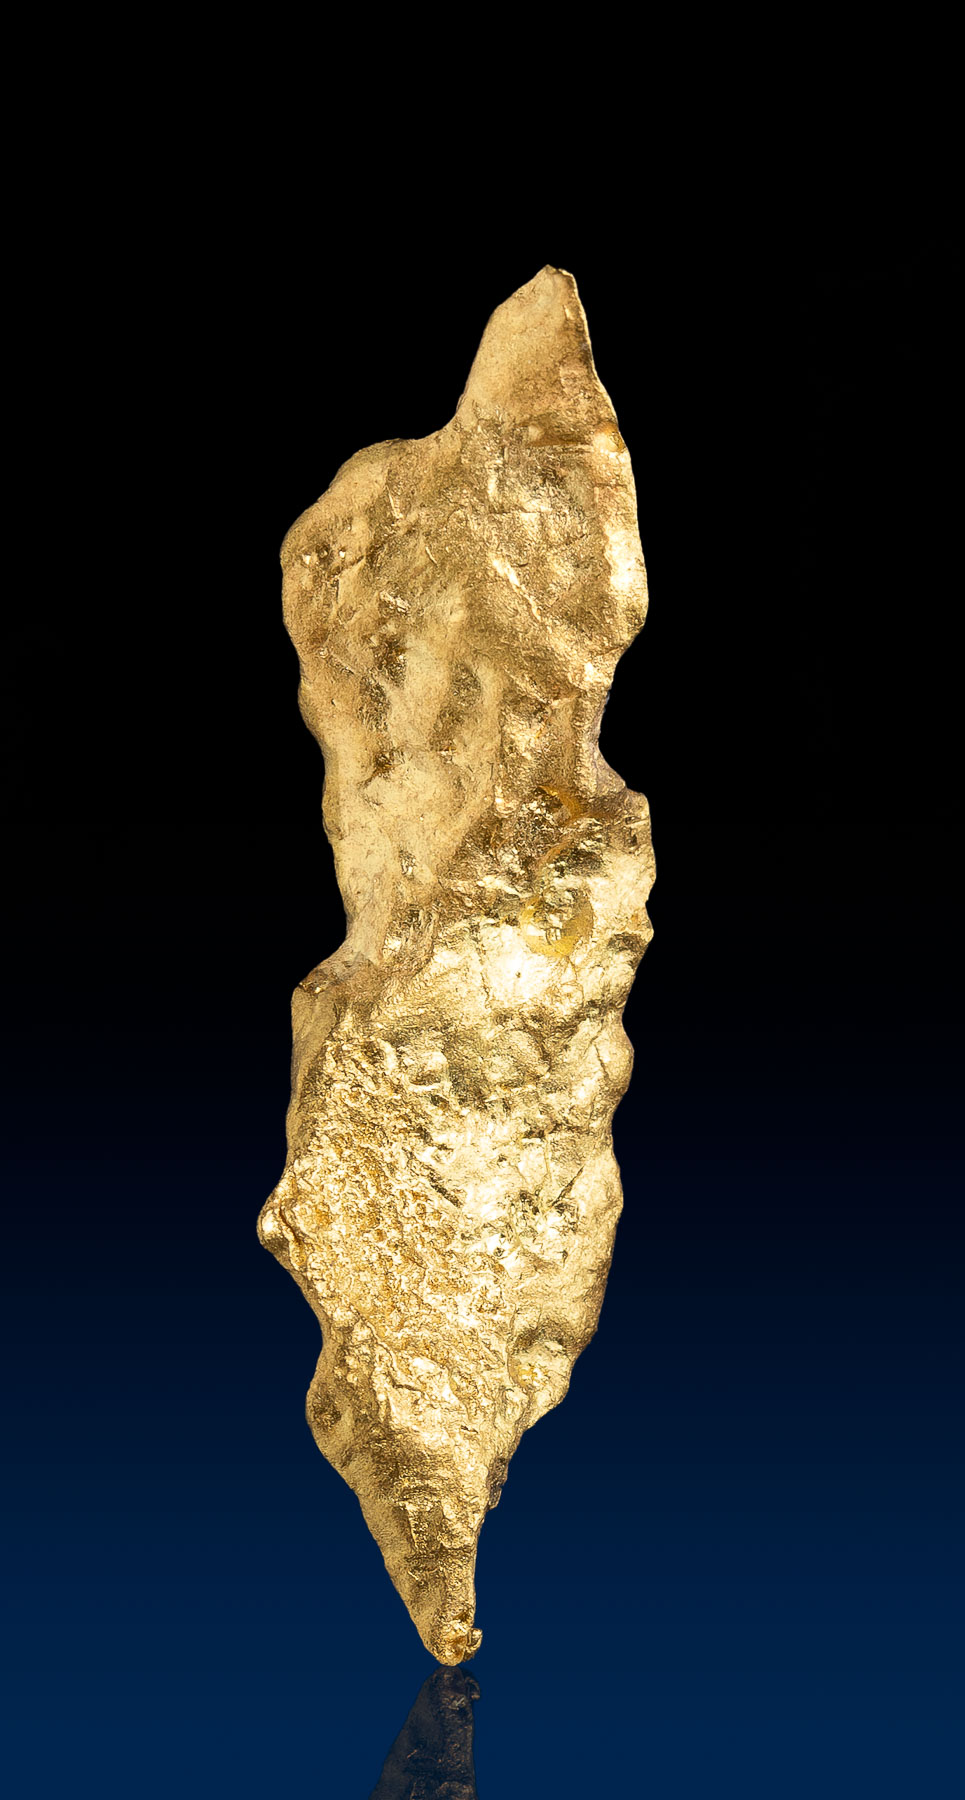 Tall Pointed Australian Natural Gold Nugget - 4.66 grams